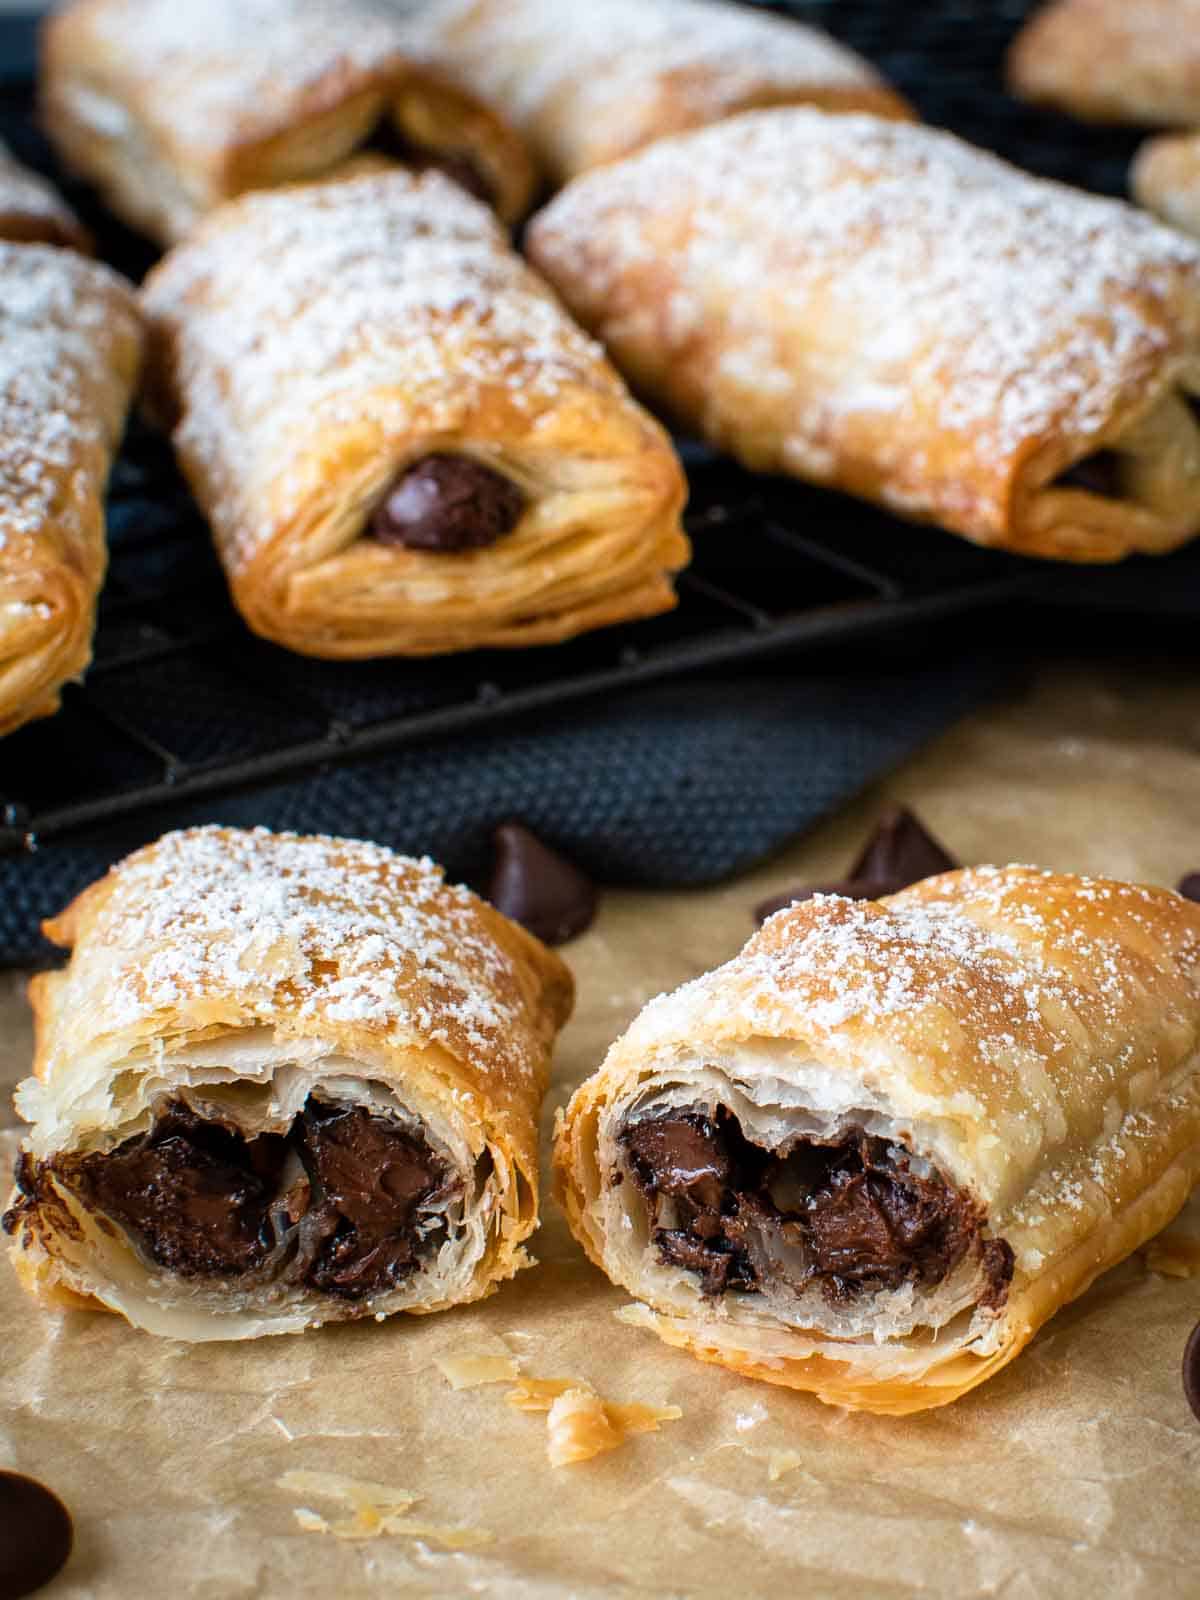 Crispy puff pastry rolls cut in half showing with chocolate in the centre, more in the background.